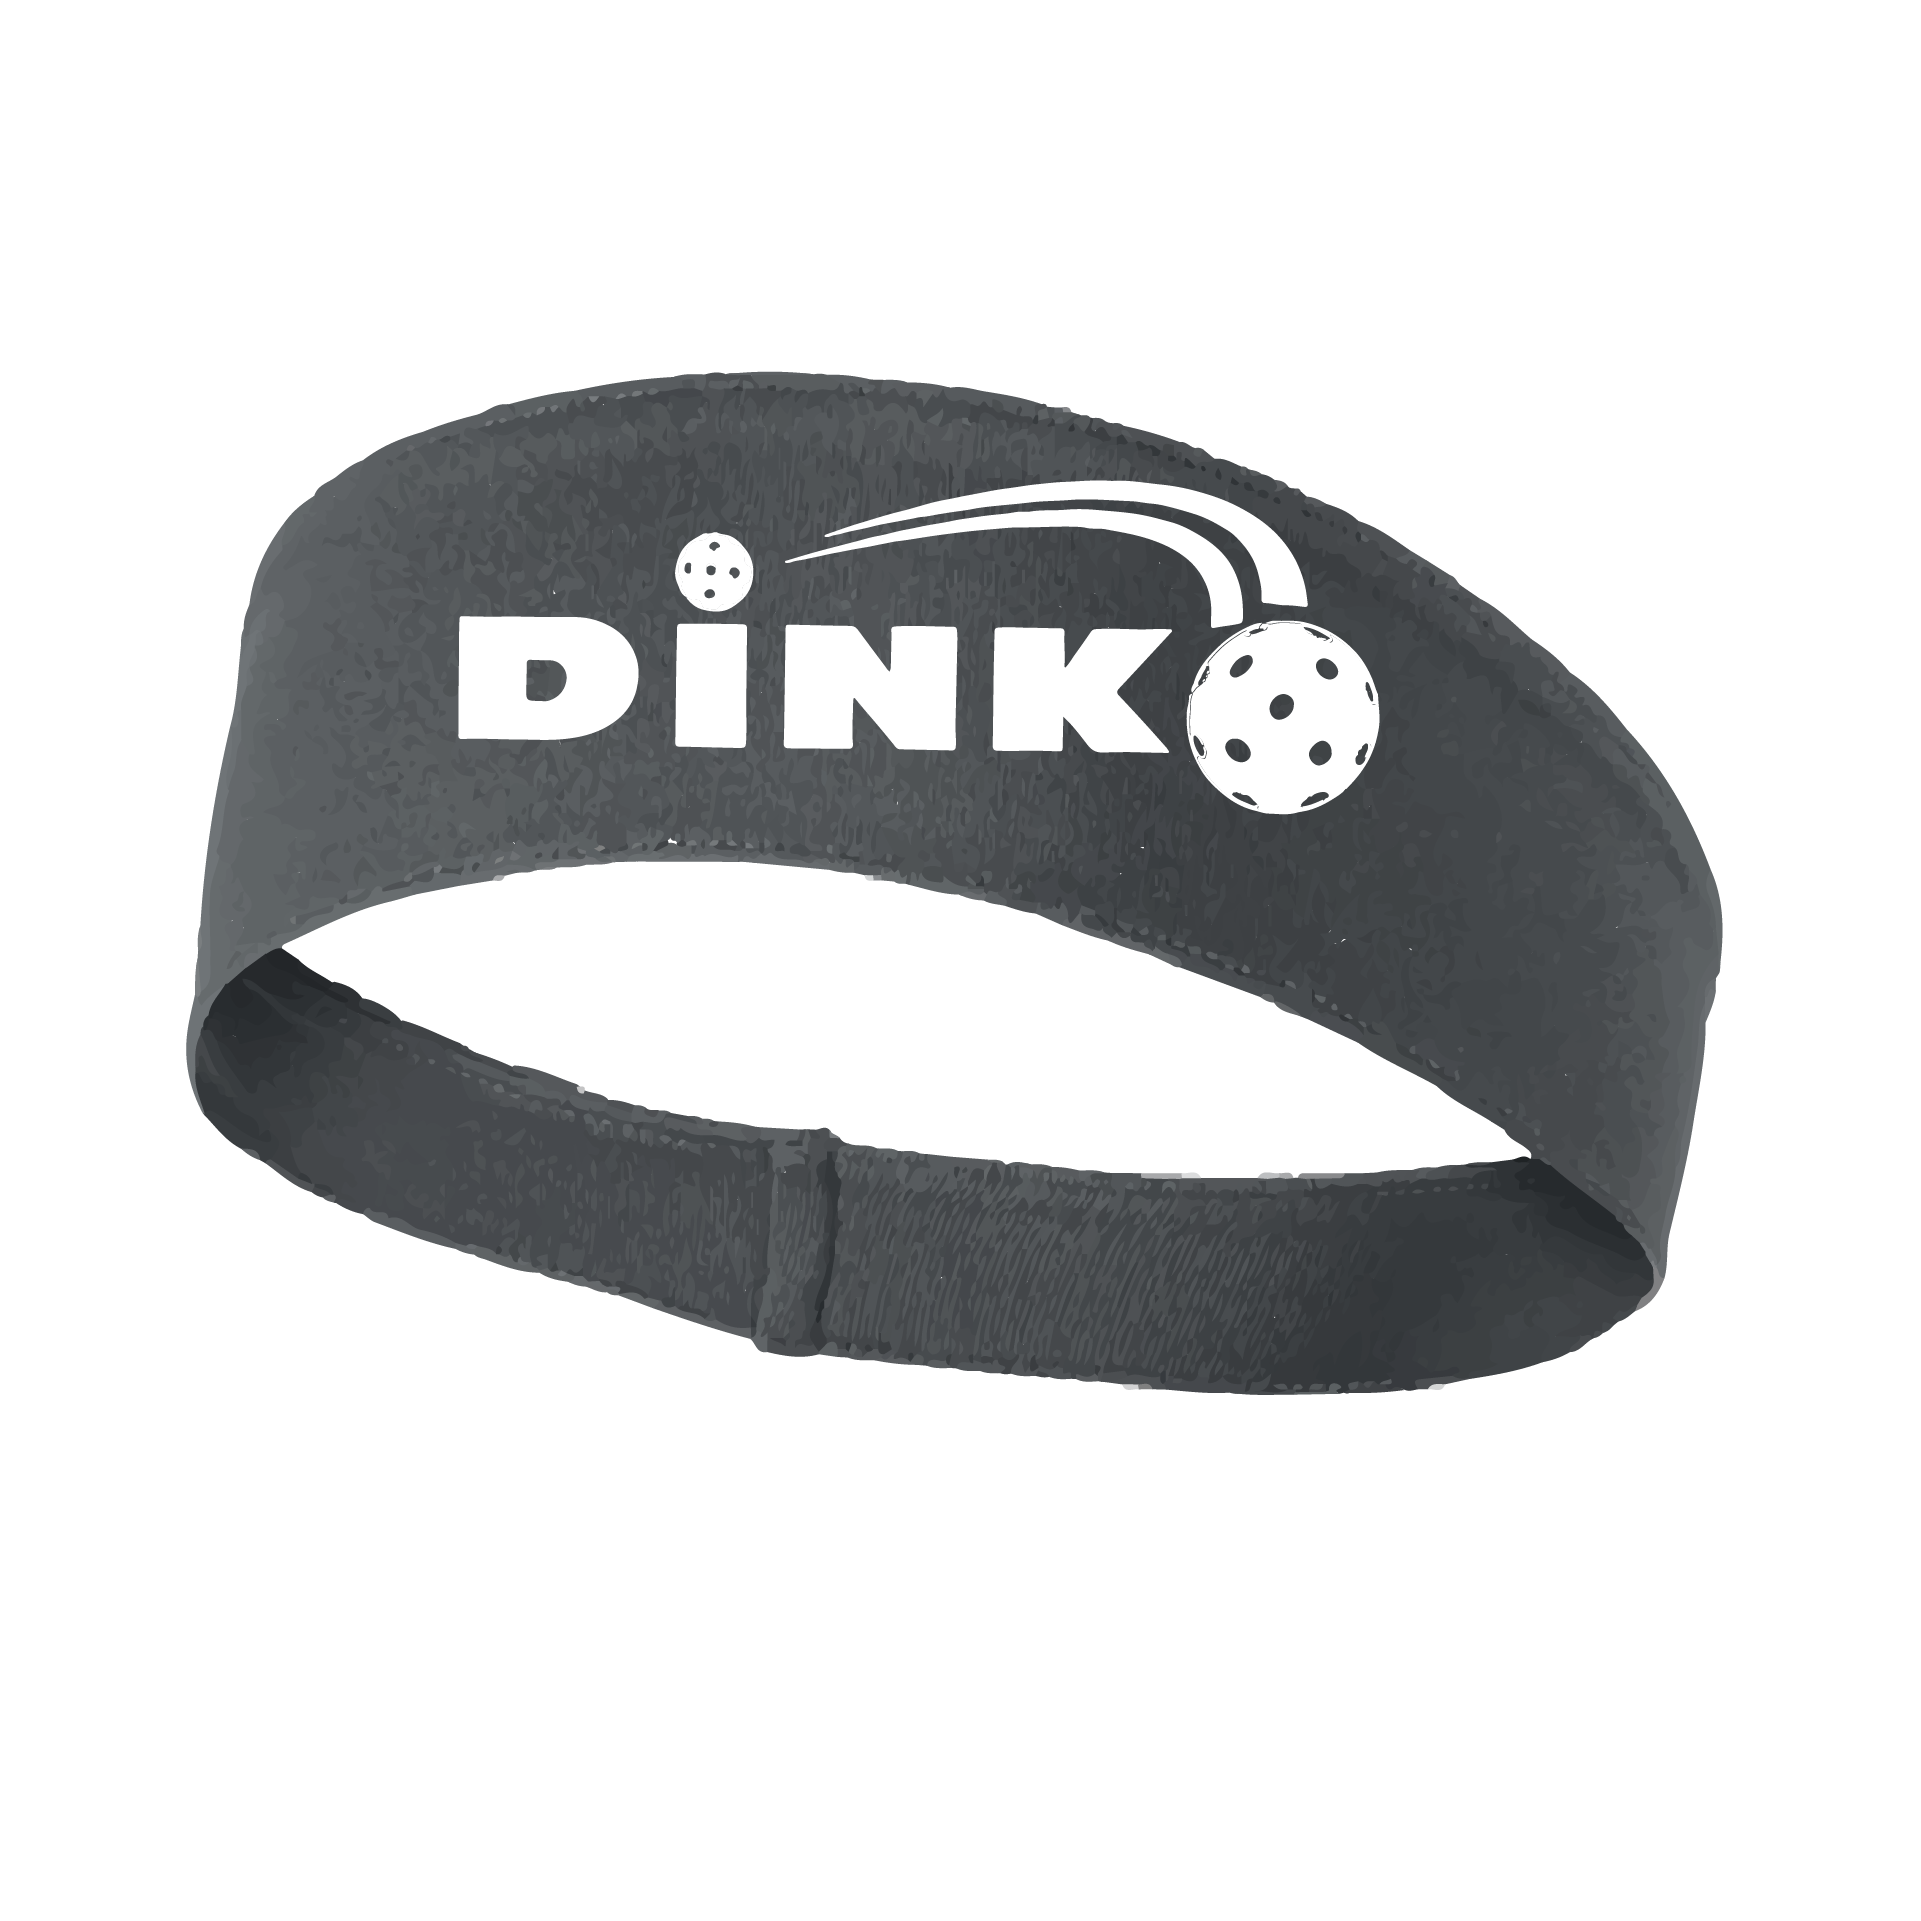 Pickleball Design: Dink  This fun, pickleball designed, moisture-wicking headband narrows in the back to fit more securely. Single-needle top-stitched edging. These headbands come in a variety of colors. Truly shows your love for the sport of pickleball!!